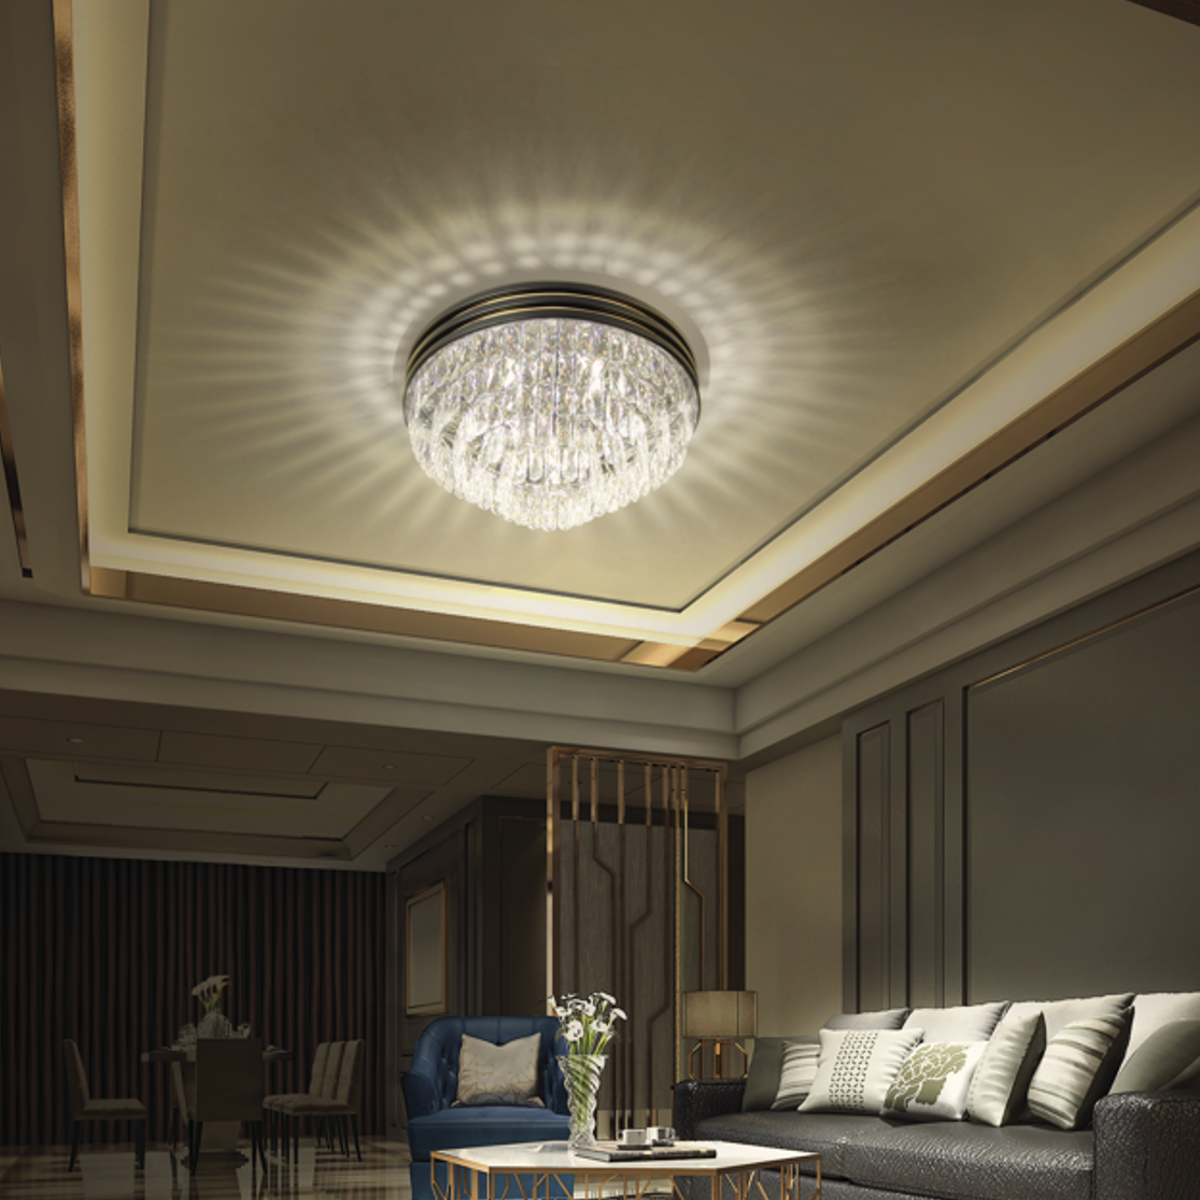 Philips Naica ceiling Chandelier